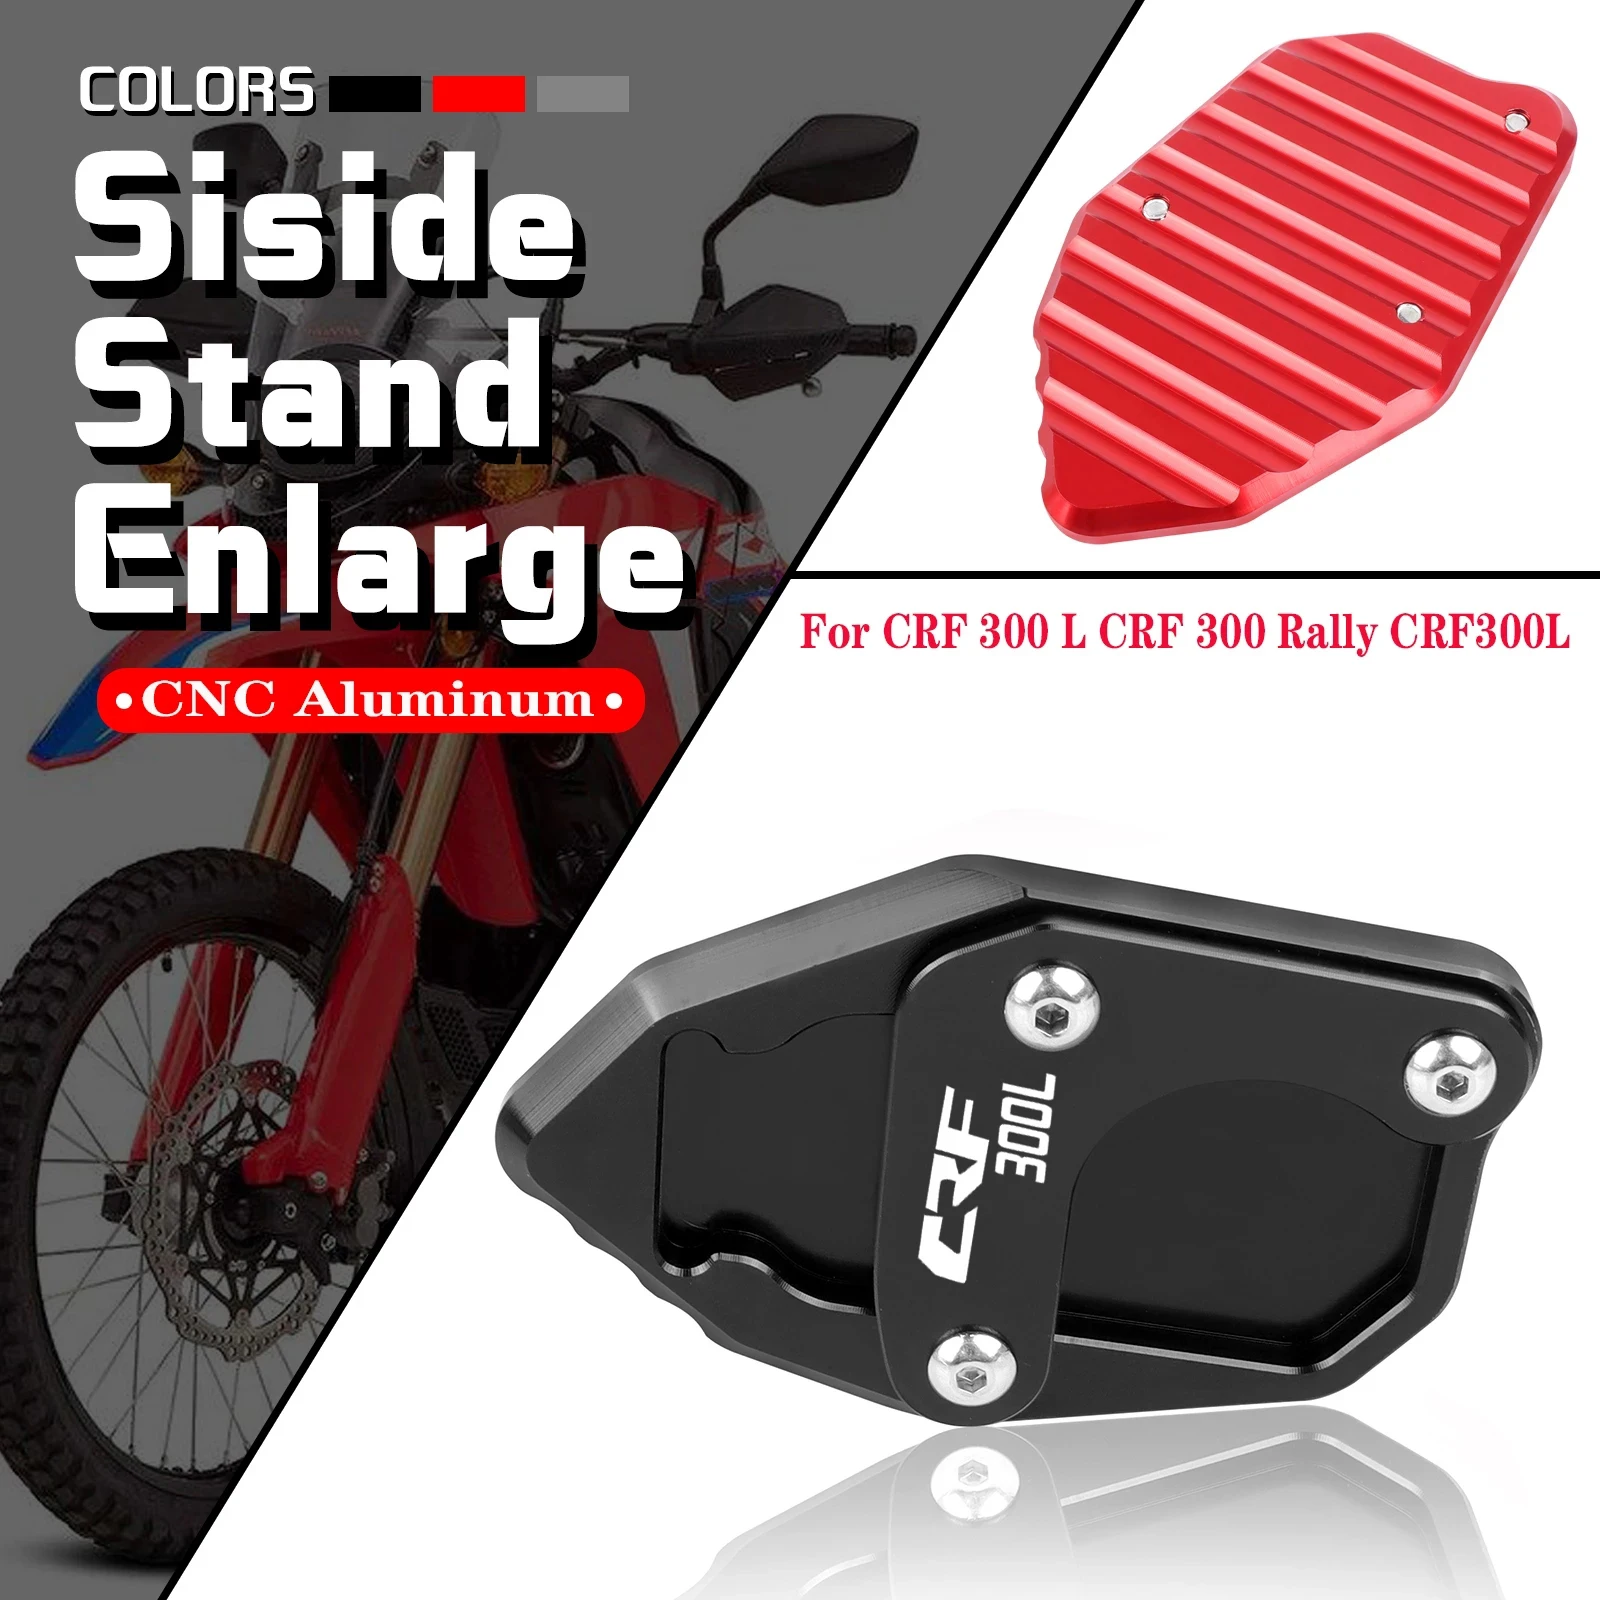 Side Stand Foot Enlarger CRF300L Rally 2021-2022 CRF300L Rally Extension Enlarger Plate xitomer Side Stand Enlarger Fit for CRF300L 2021 2022 Motorcycle Kickstand Extender CRF300L 2021-2022 